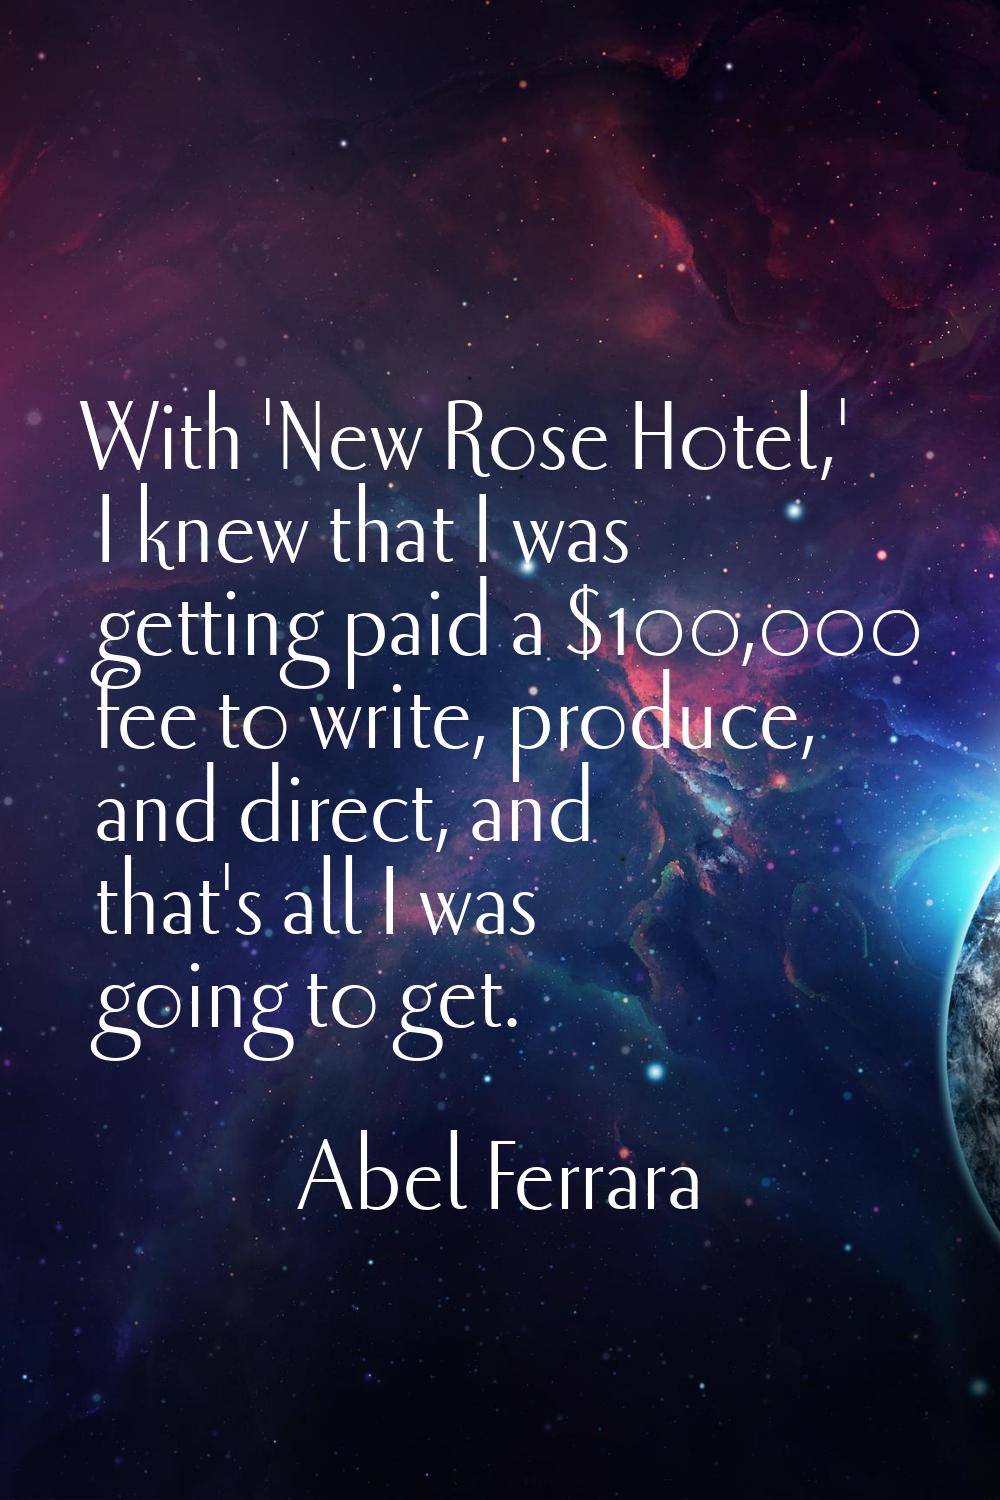 With 'New Rose Hotel,' I knew that I was getting paid a $100,000 fee to write, produce, and direct,